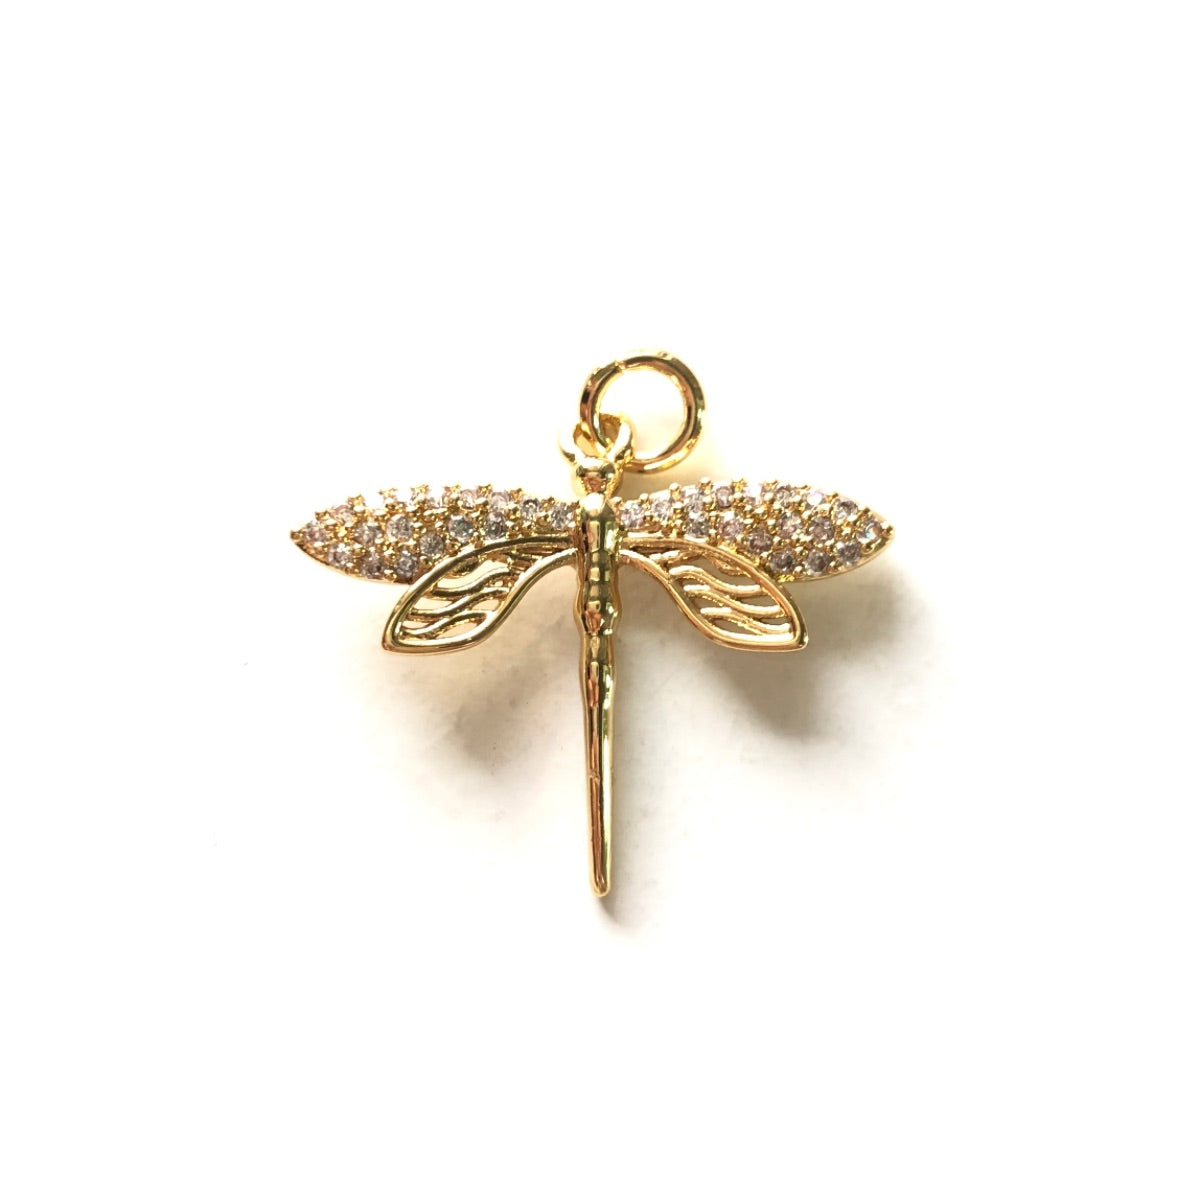 10pcs/lot 27.3*23.3mm CZ Paved Dragonfly Charms Gold CZ Paved Charms Animals & Insects Charms Beads Beyond